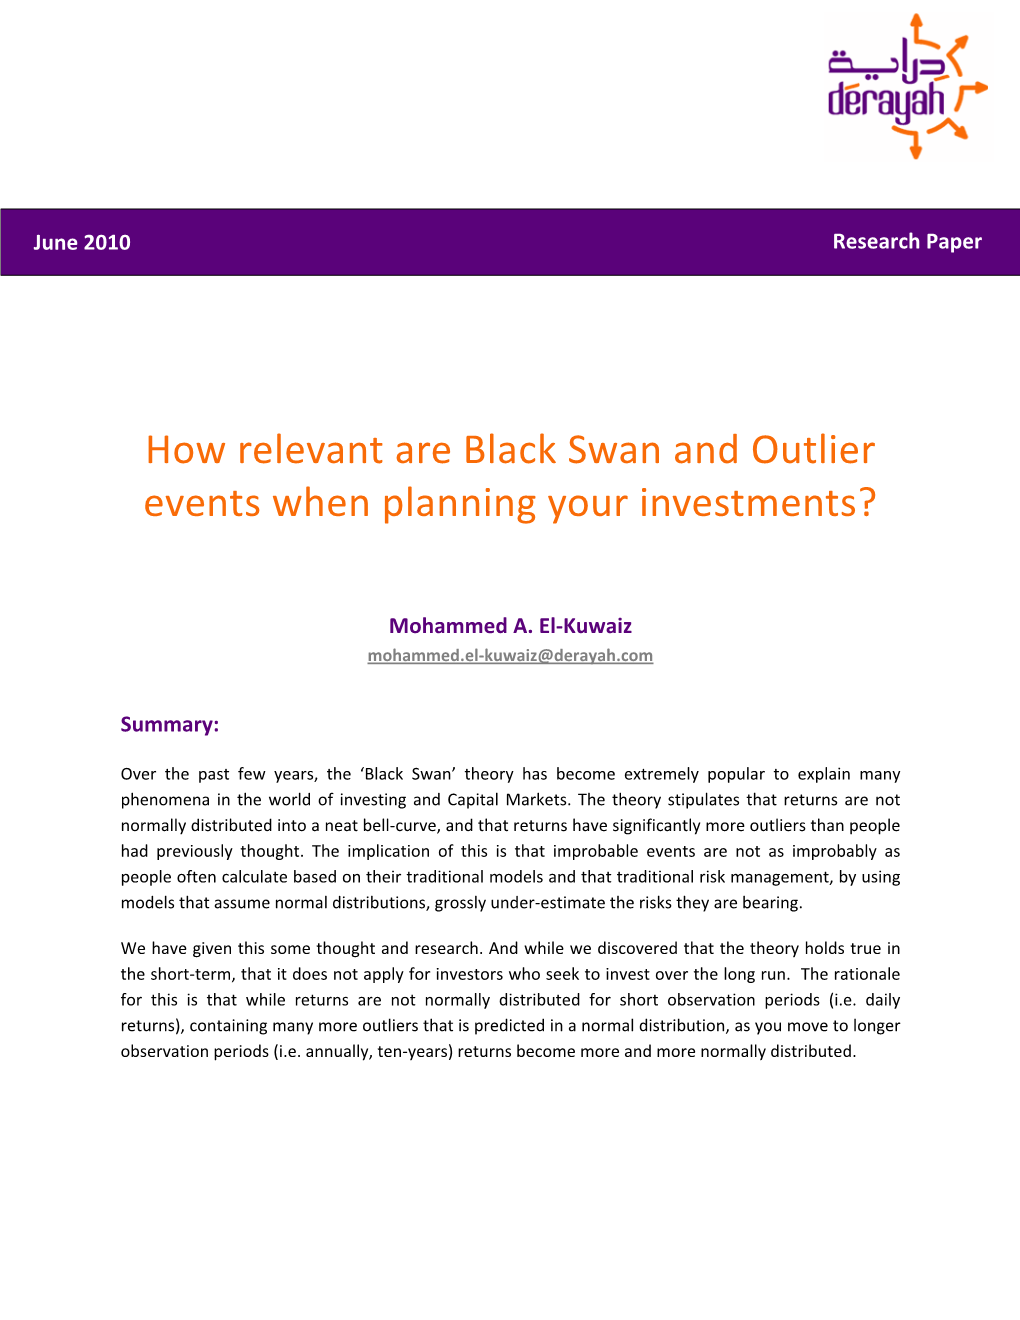 How Relevant Are Black Swan and Outlier Events When Planning Your Investments?